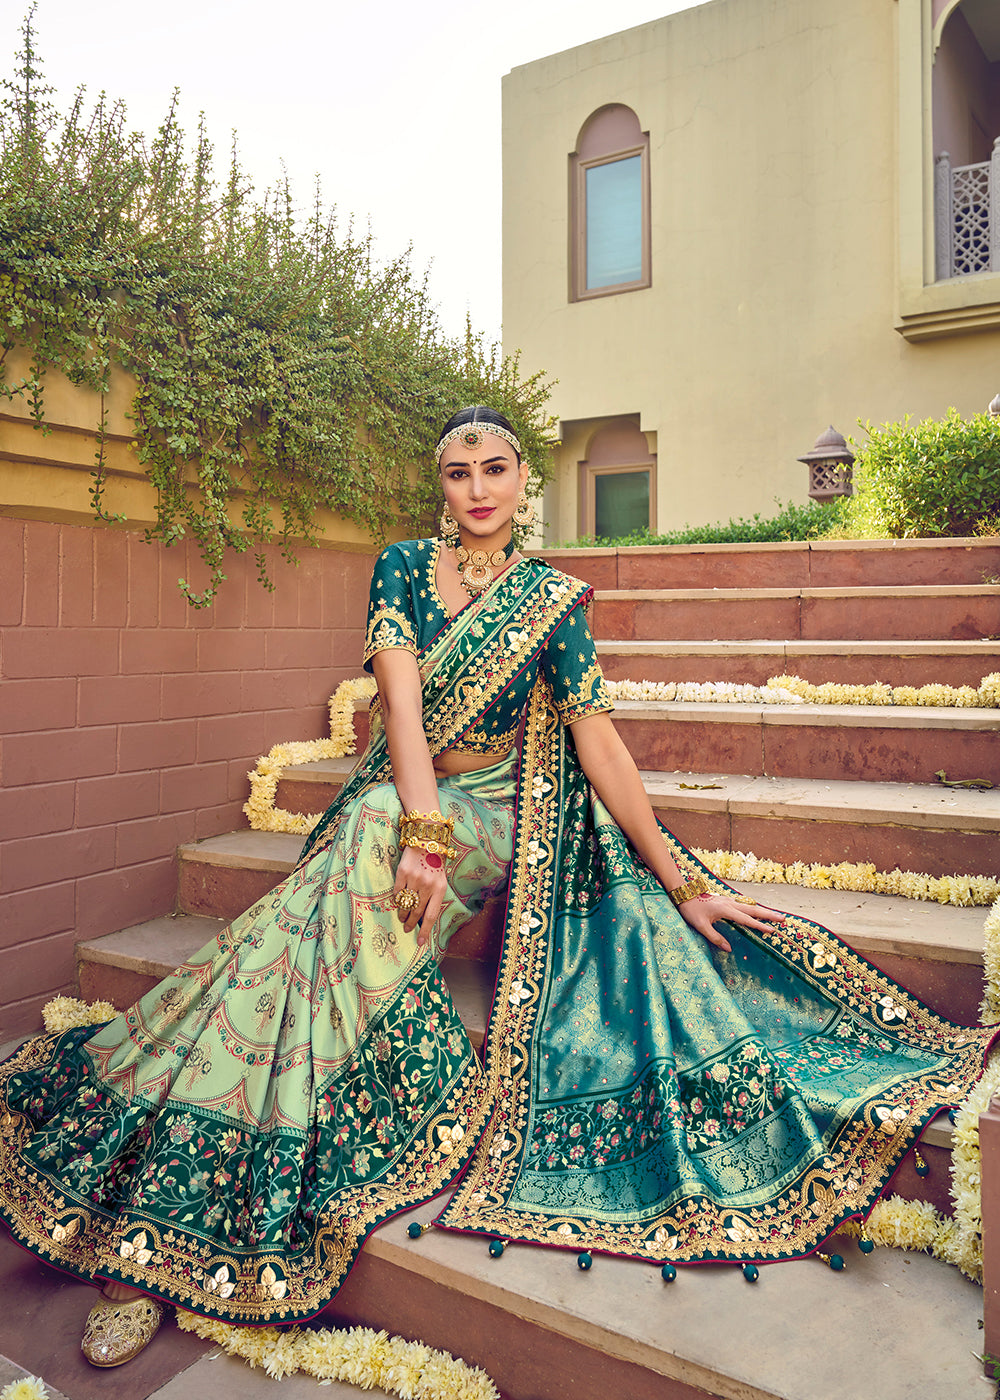 Buy Now Patna Patola Pure Silk Fern Green Wedding Traditional Saree Online in USA, UK, Canada & Worldwide at Empress Clothing. 